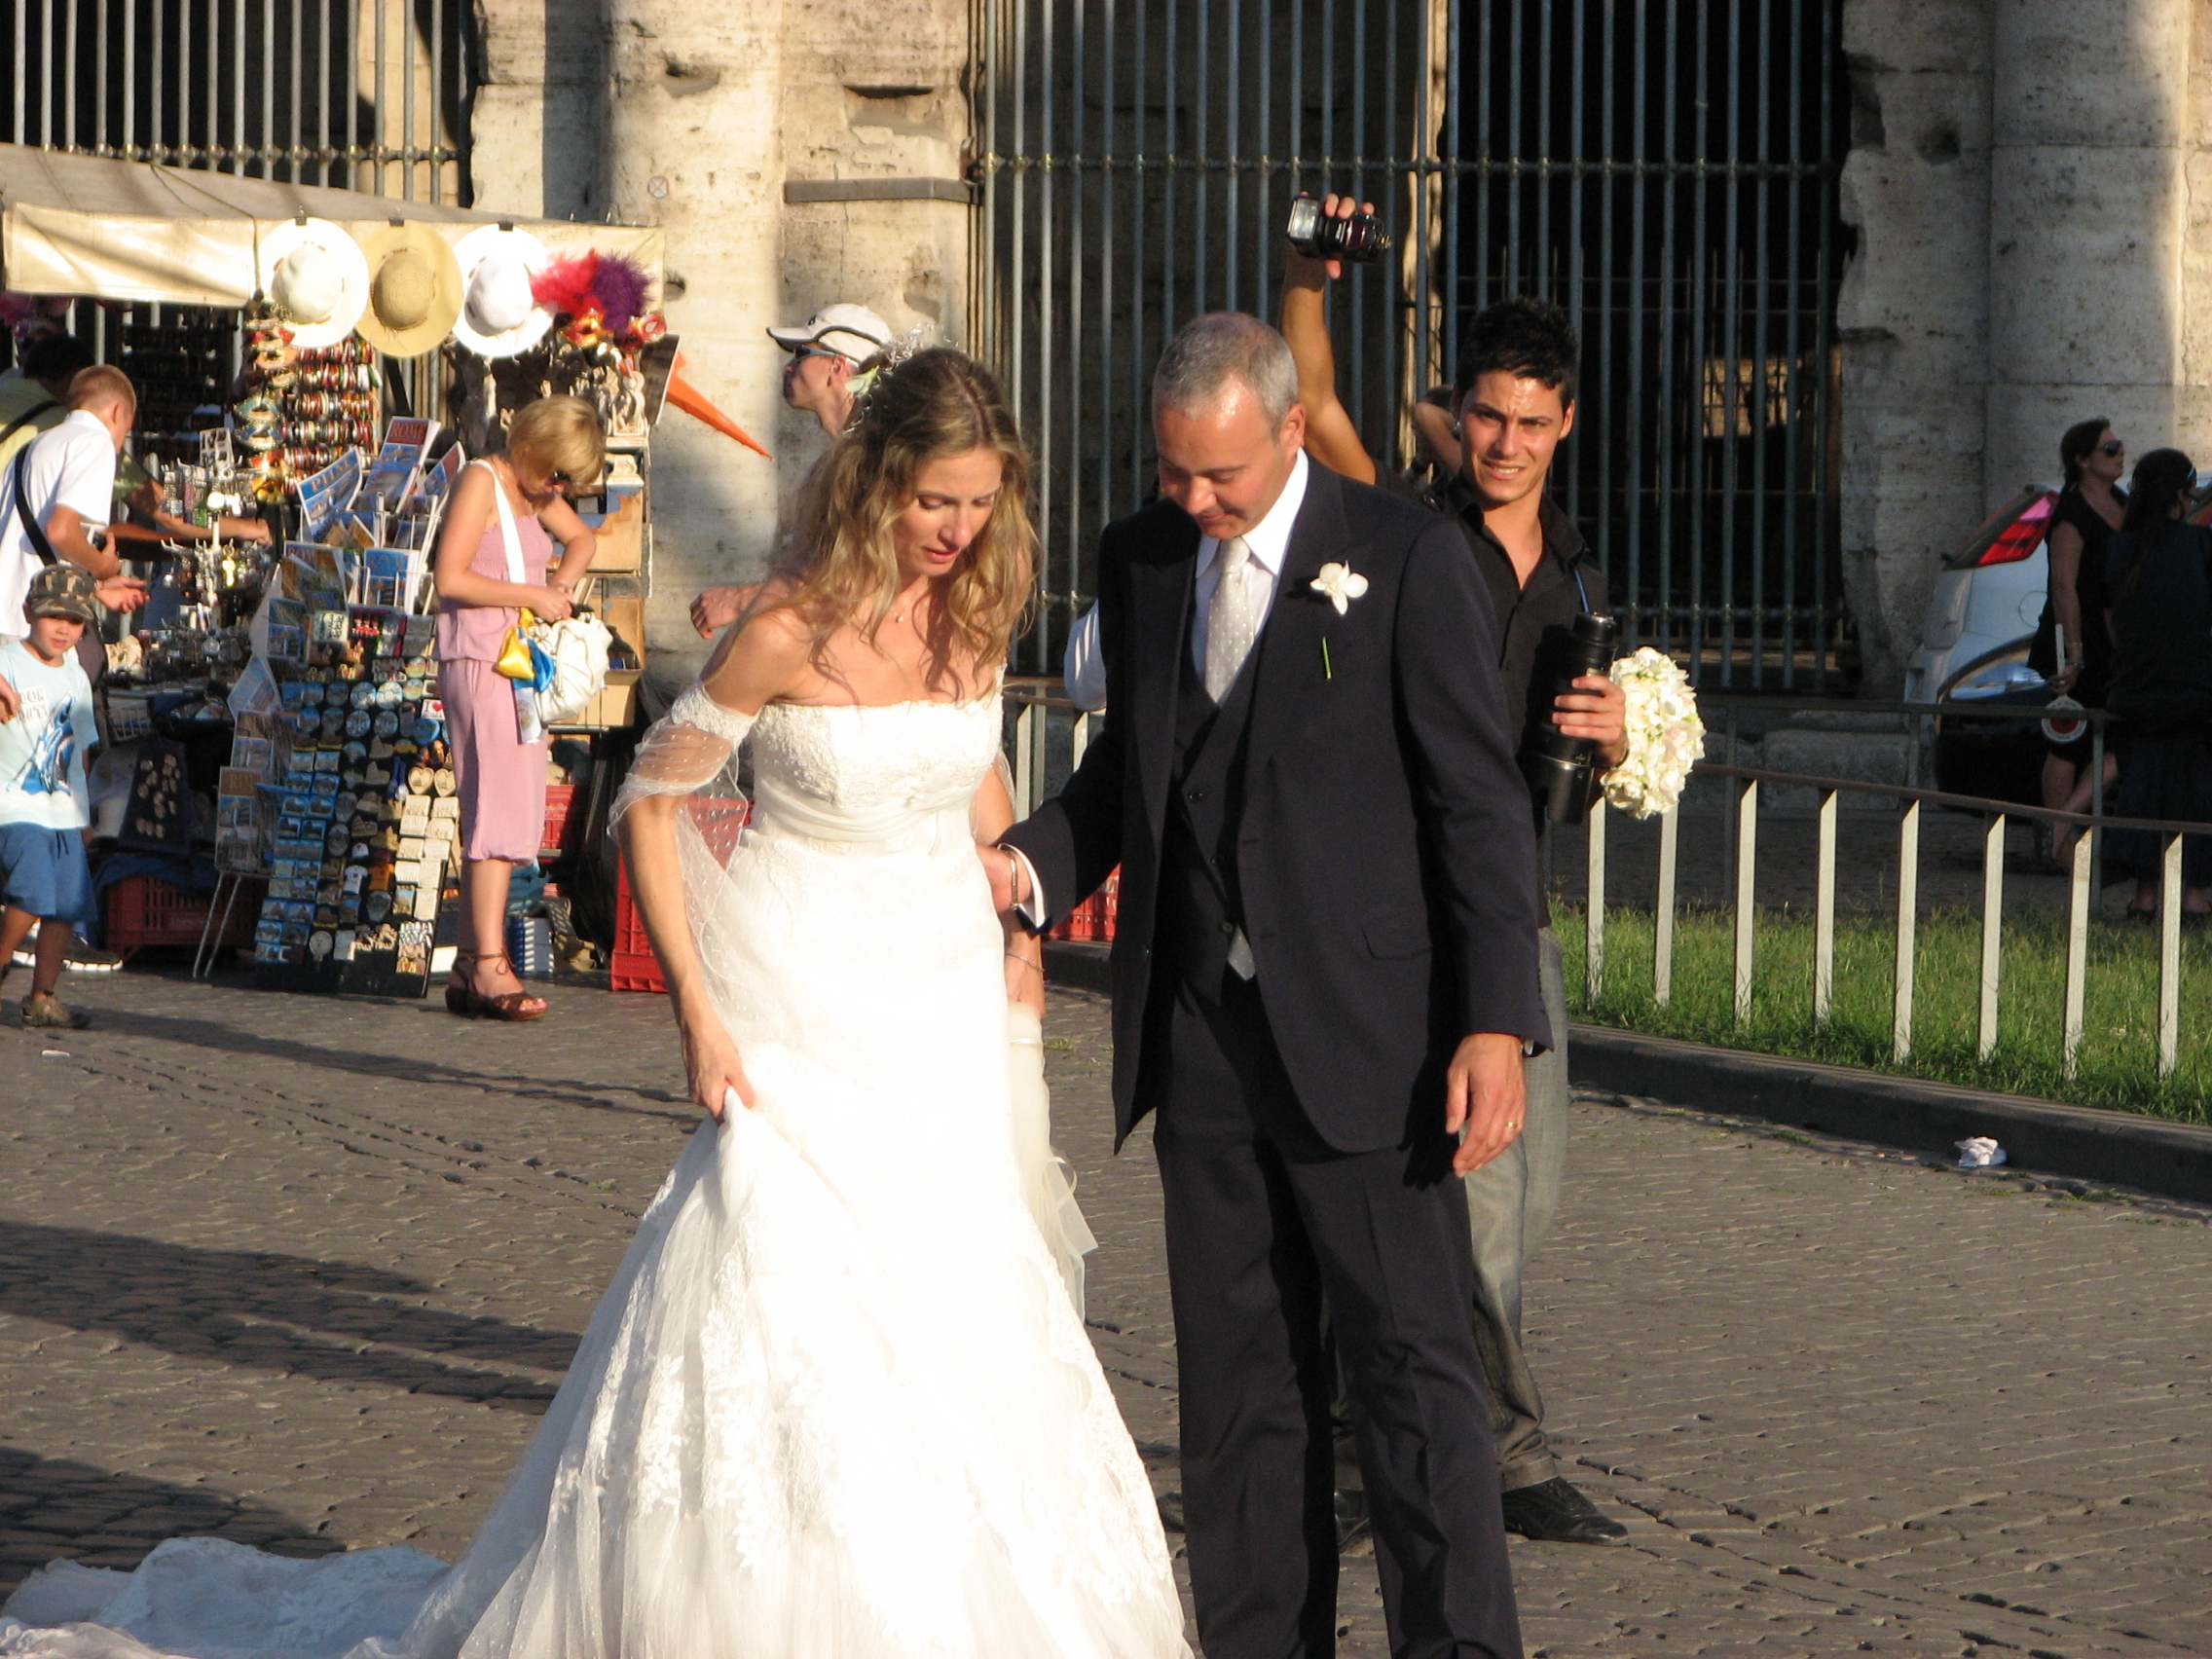 Newlyweds in Rome, Italy, European Union, August 2011, picture 32.